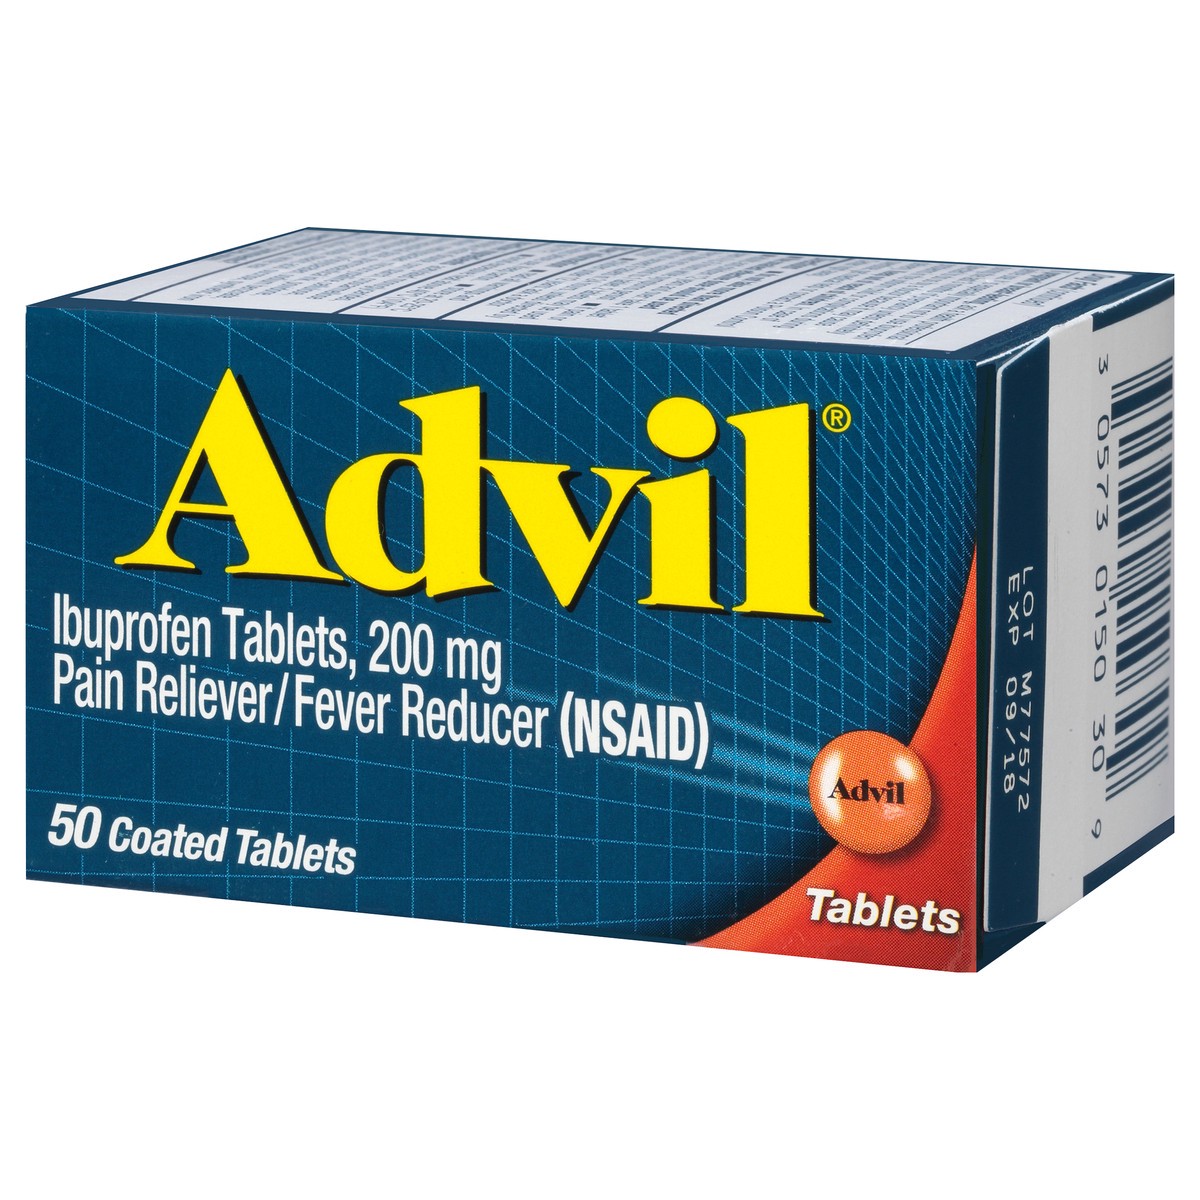 slide 3 of 8, Advil Pain And Fever Reducer Tablets - Ibuprofen (NSAID), 50 ct